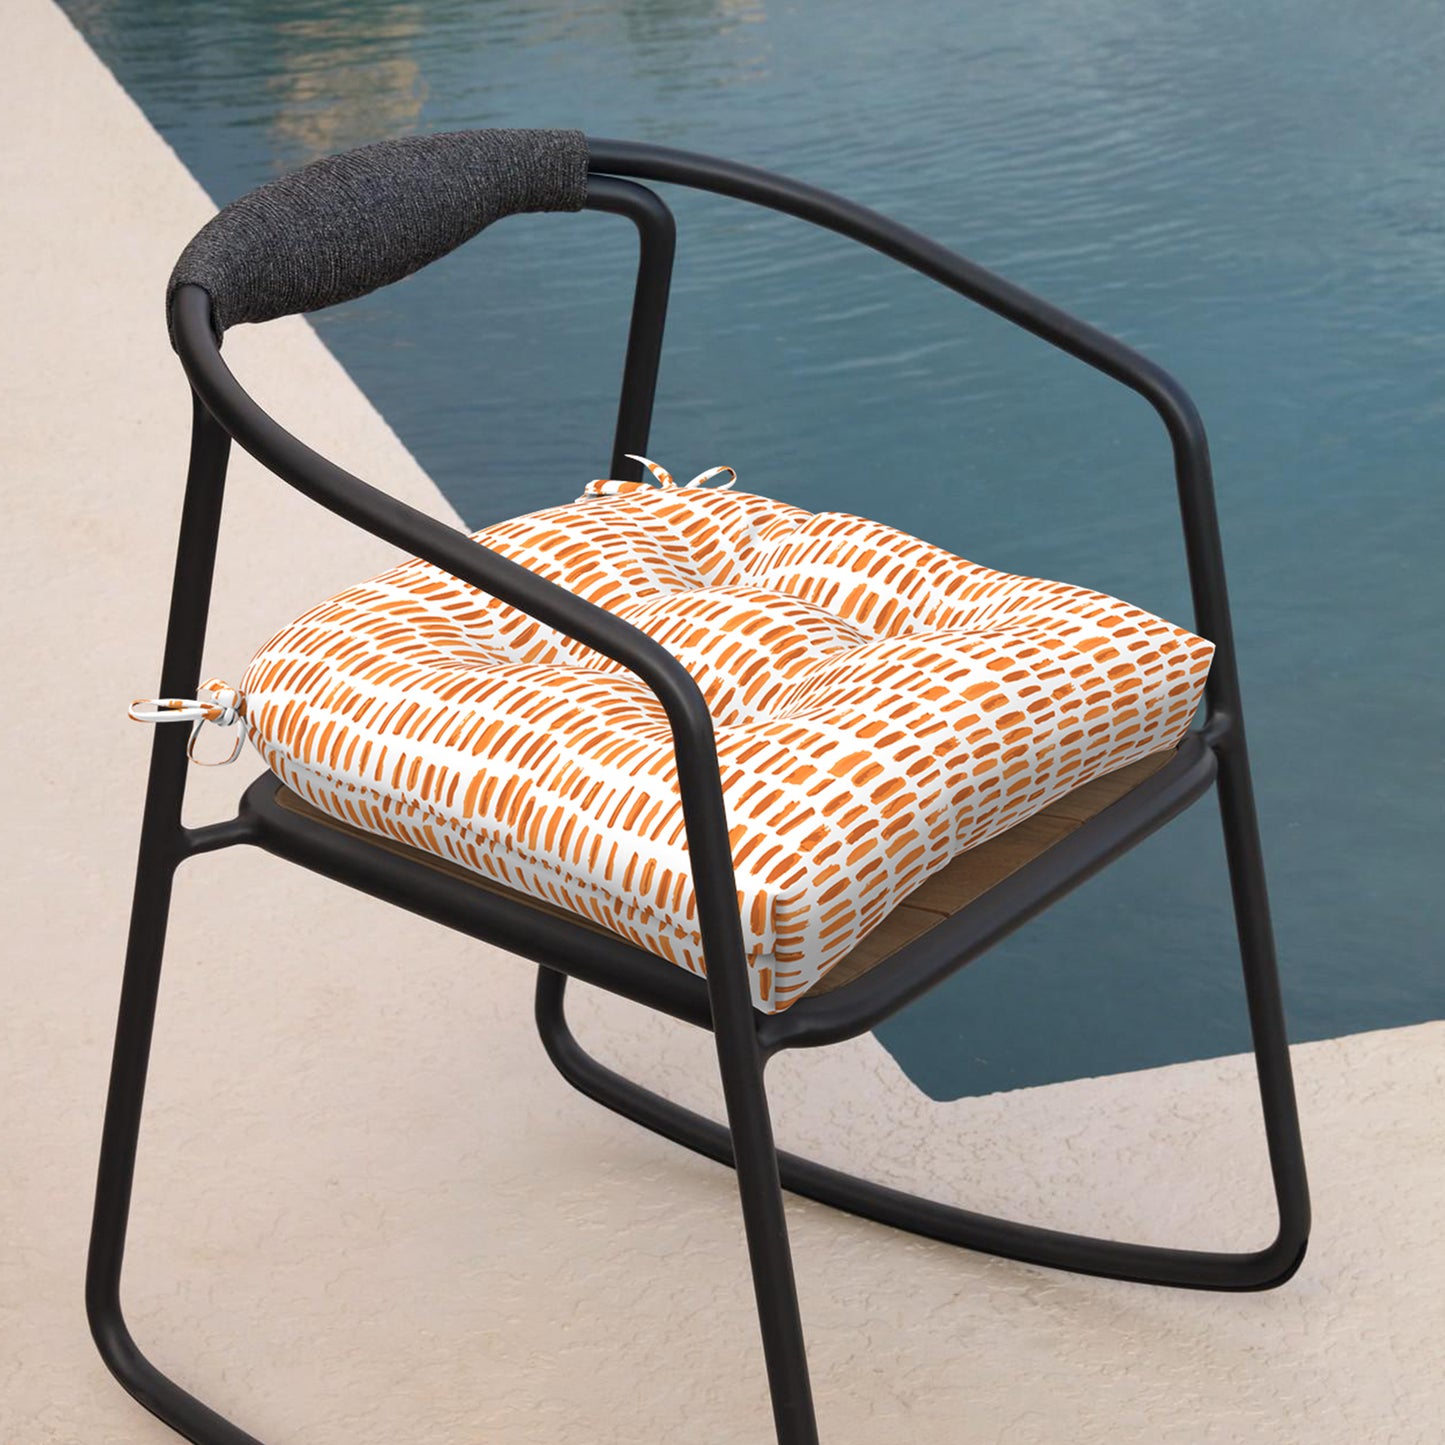 Melody Elephant Patio Wicker Chair Cushions, All Weather Outdoor Tufted Chair Pads Pack of 2, 19 x 19 x 5 Inch U-Shaped Seat Cushions of Garden Furniture Decoration, Pebble Orange